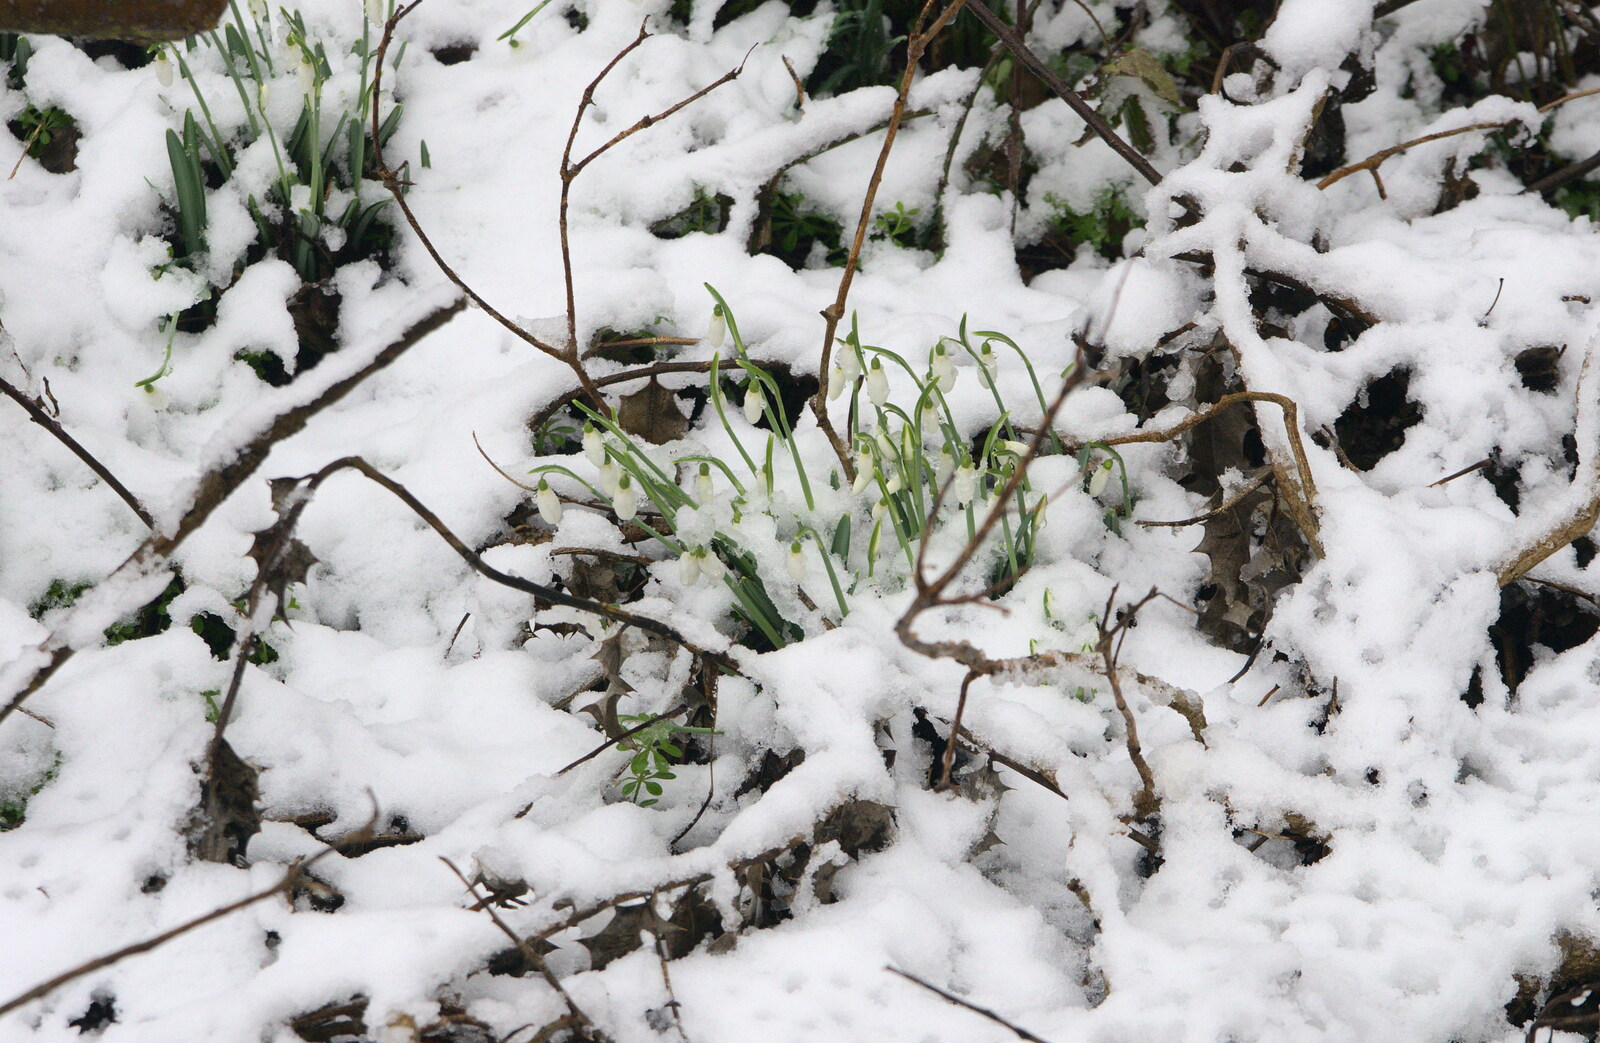 Some snowdrops are poking out from A Snowy Day, Brome, Suffolk - 12th February 2017